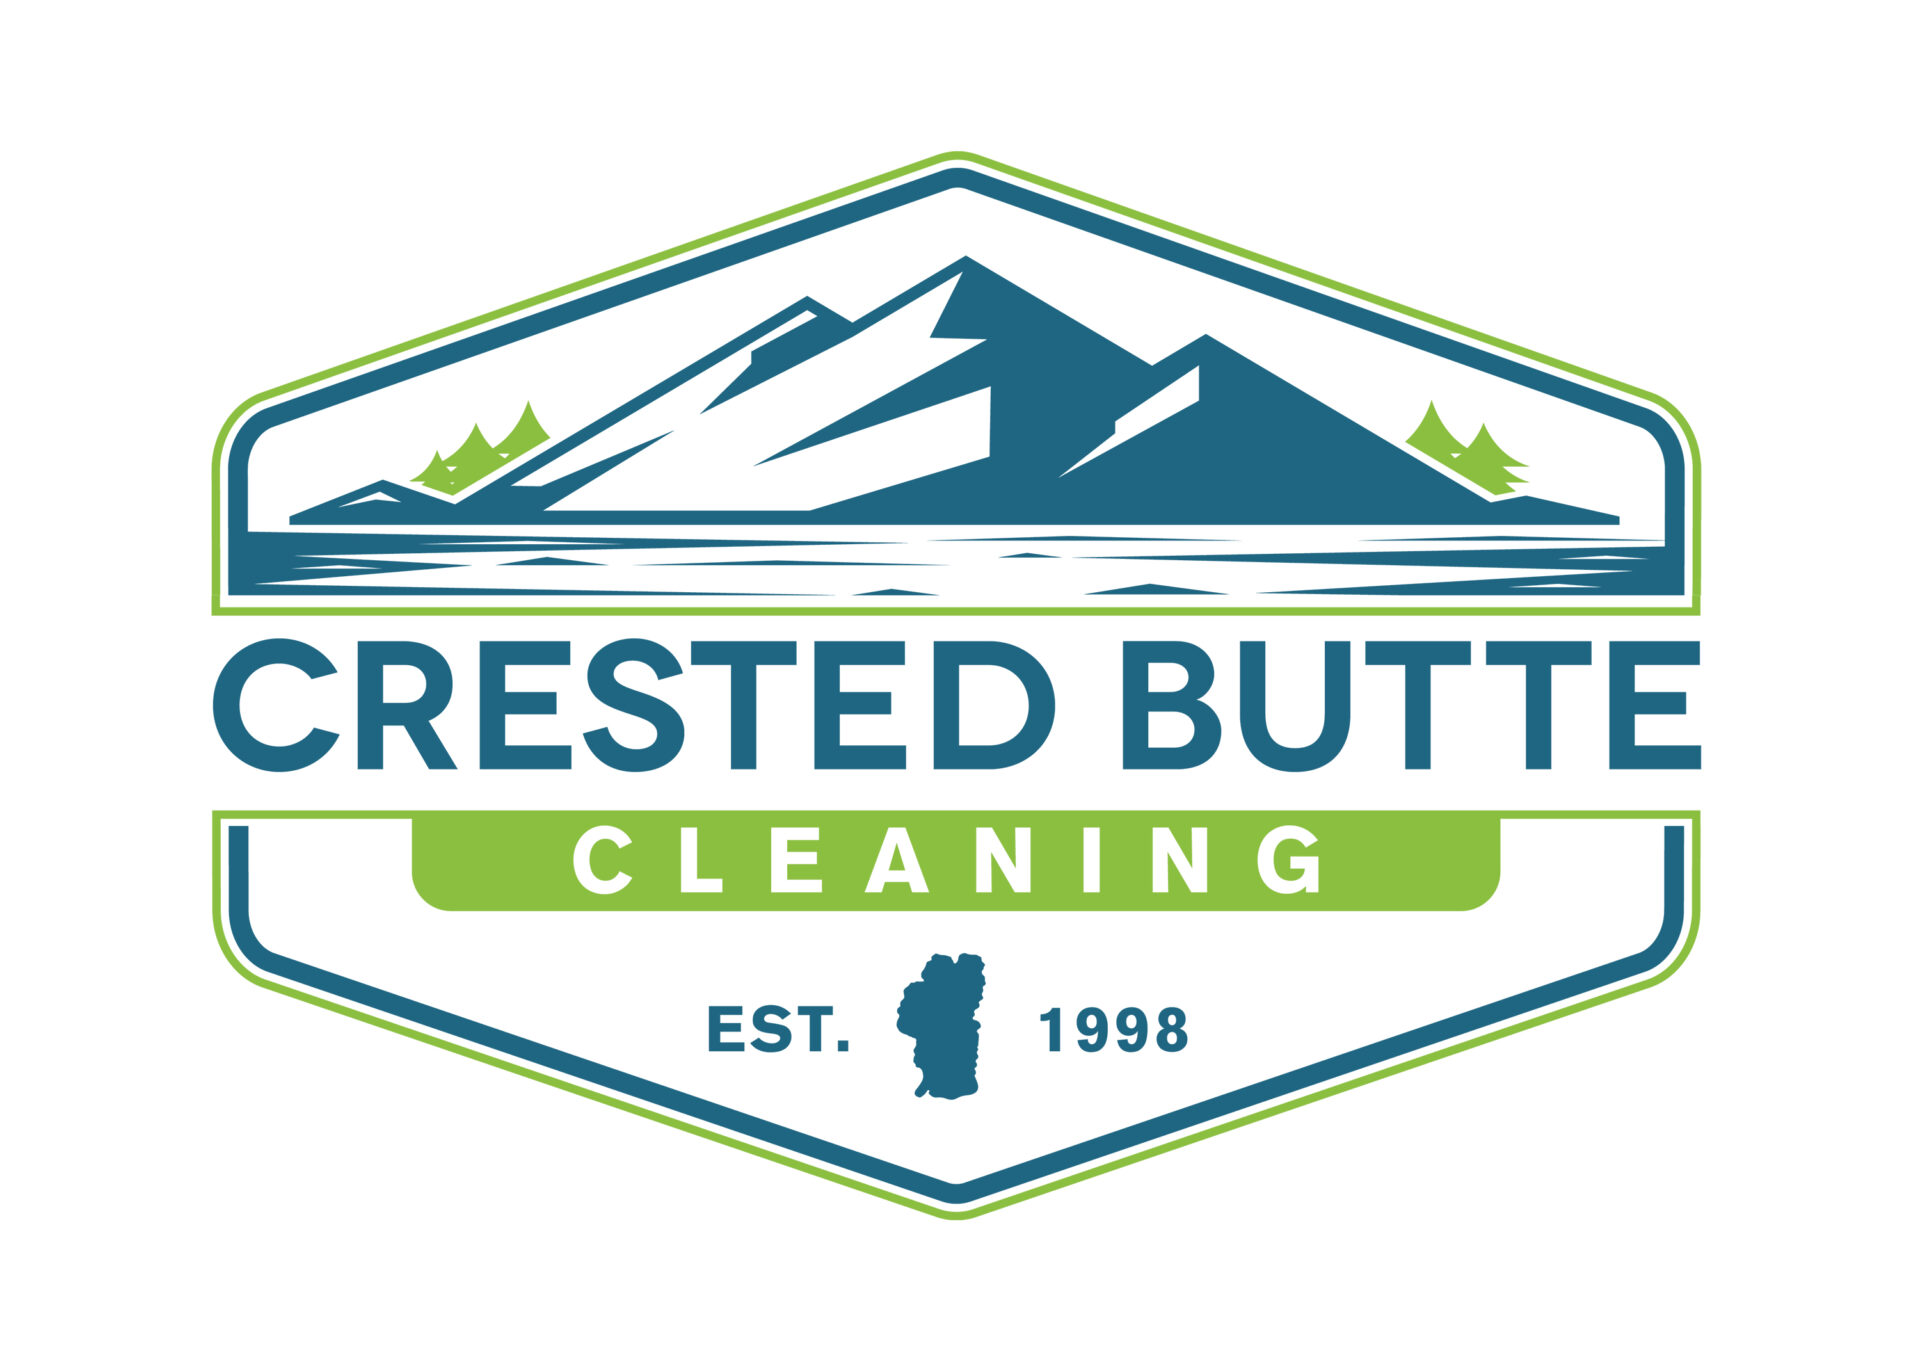 Crested Butte Cleaning